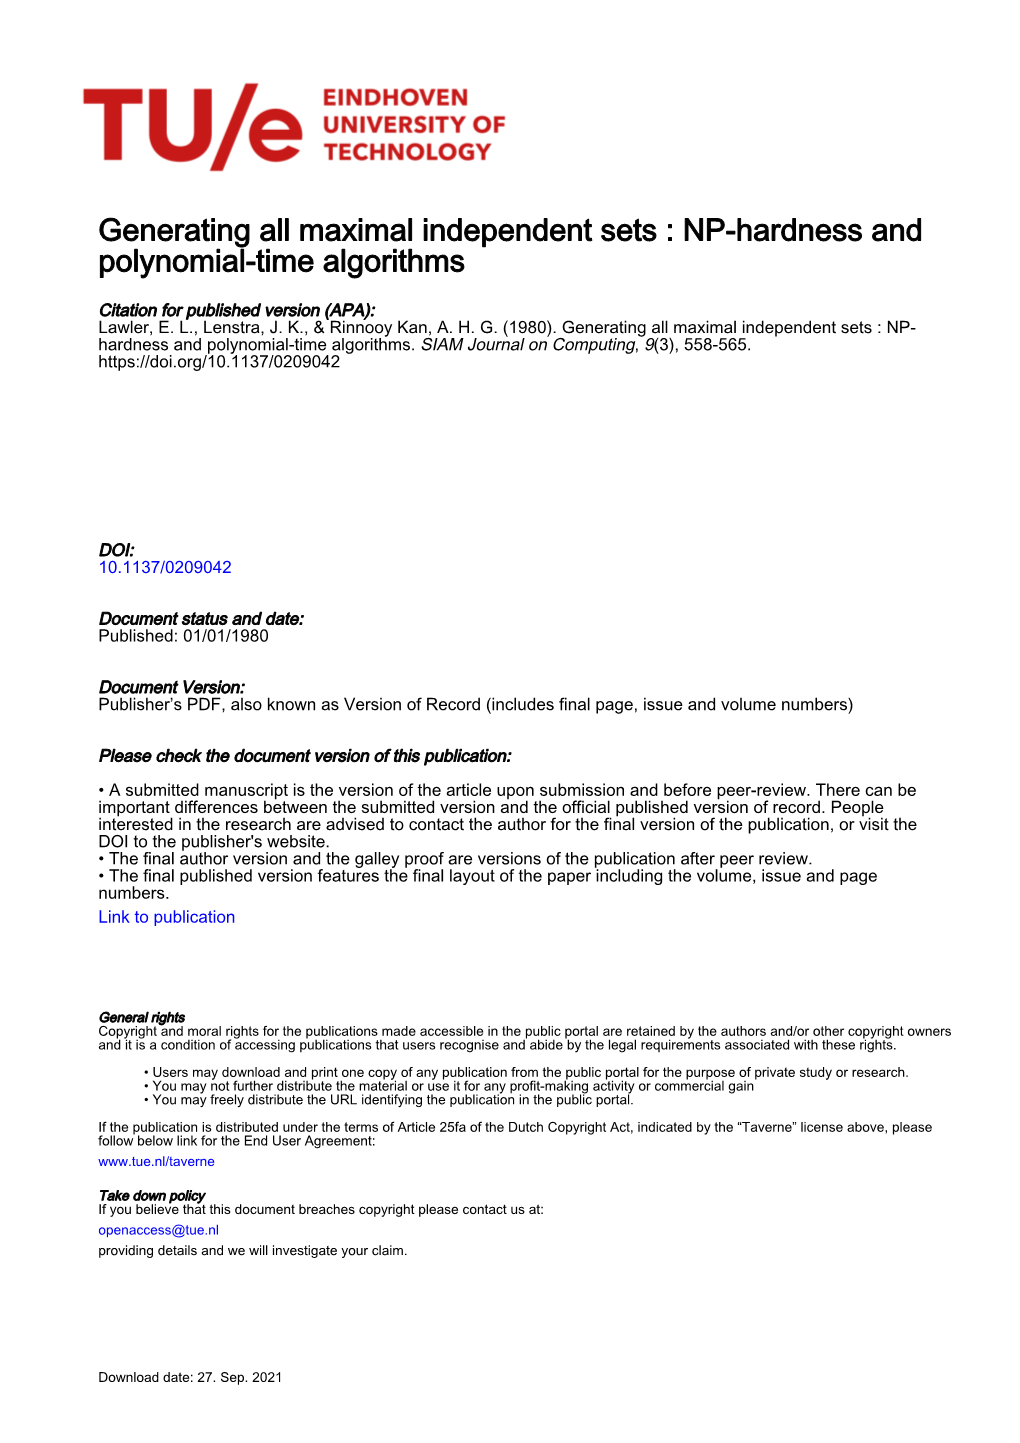 Generating All Maximal Independent Sets : NP-Hardness and Polynomial-Time Algorithms